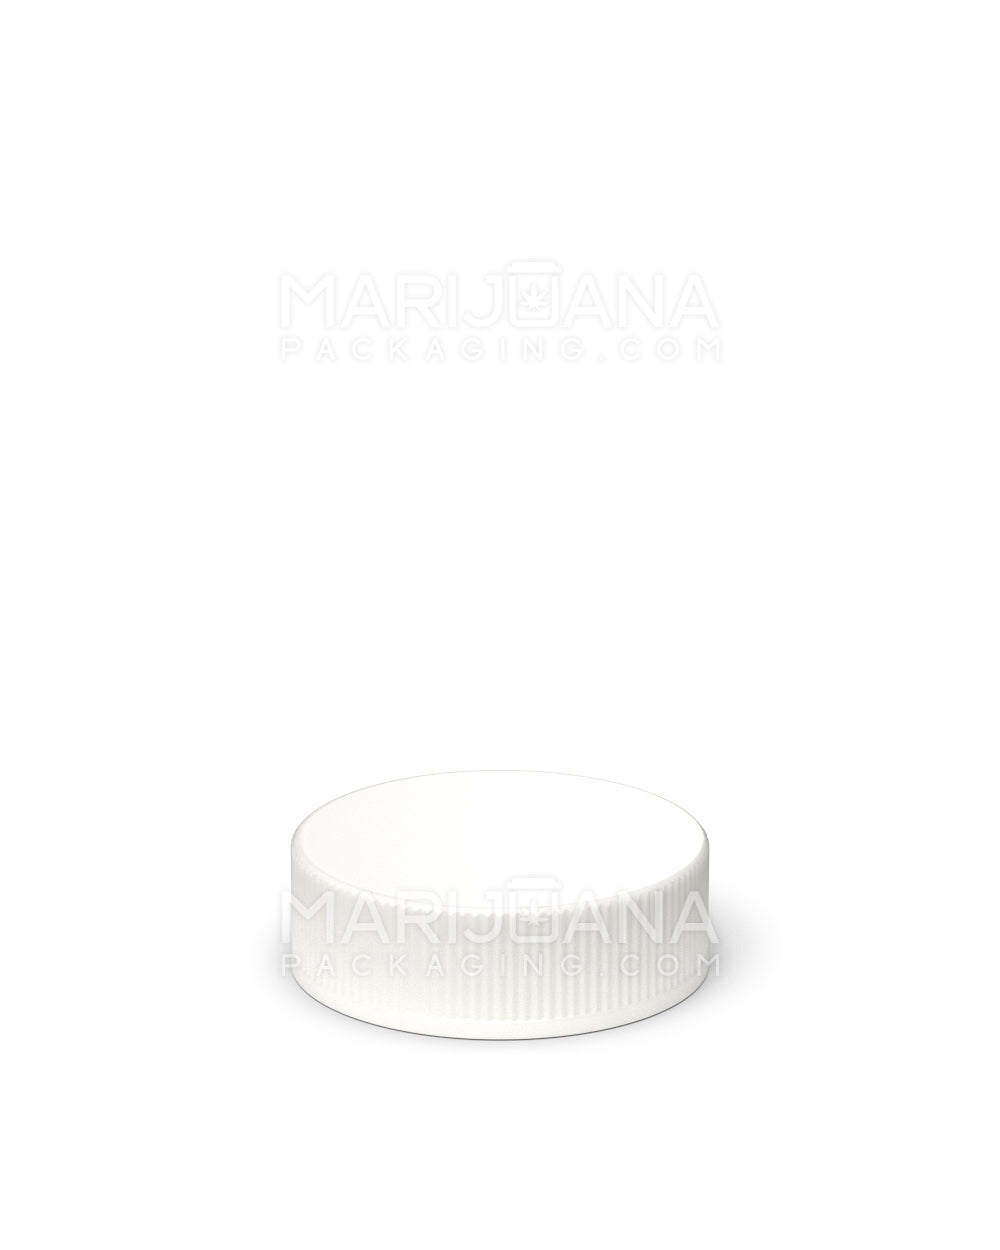 Ribbed Screw Top Flat Plastic Caps w/ Foam Liner | 28mm - Glossy White - 250 Count - 3